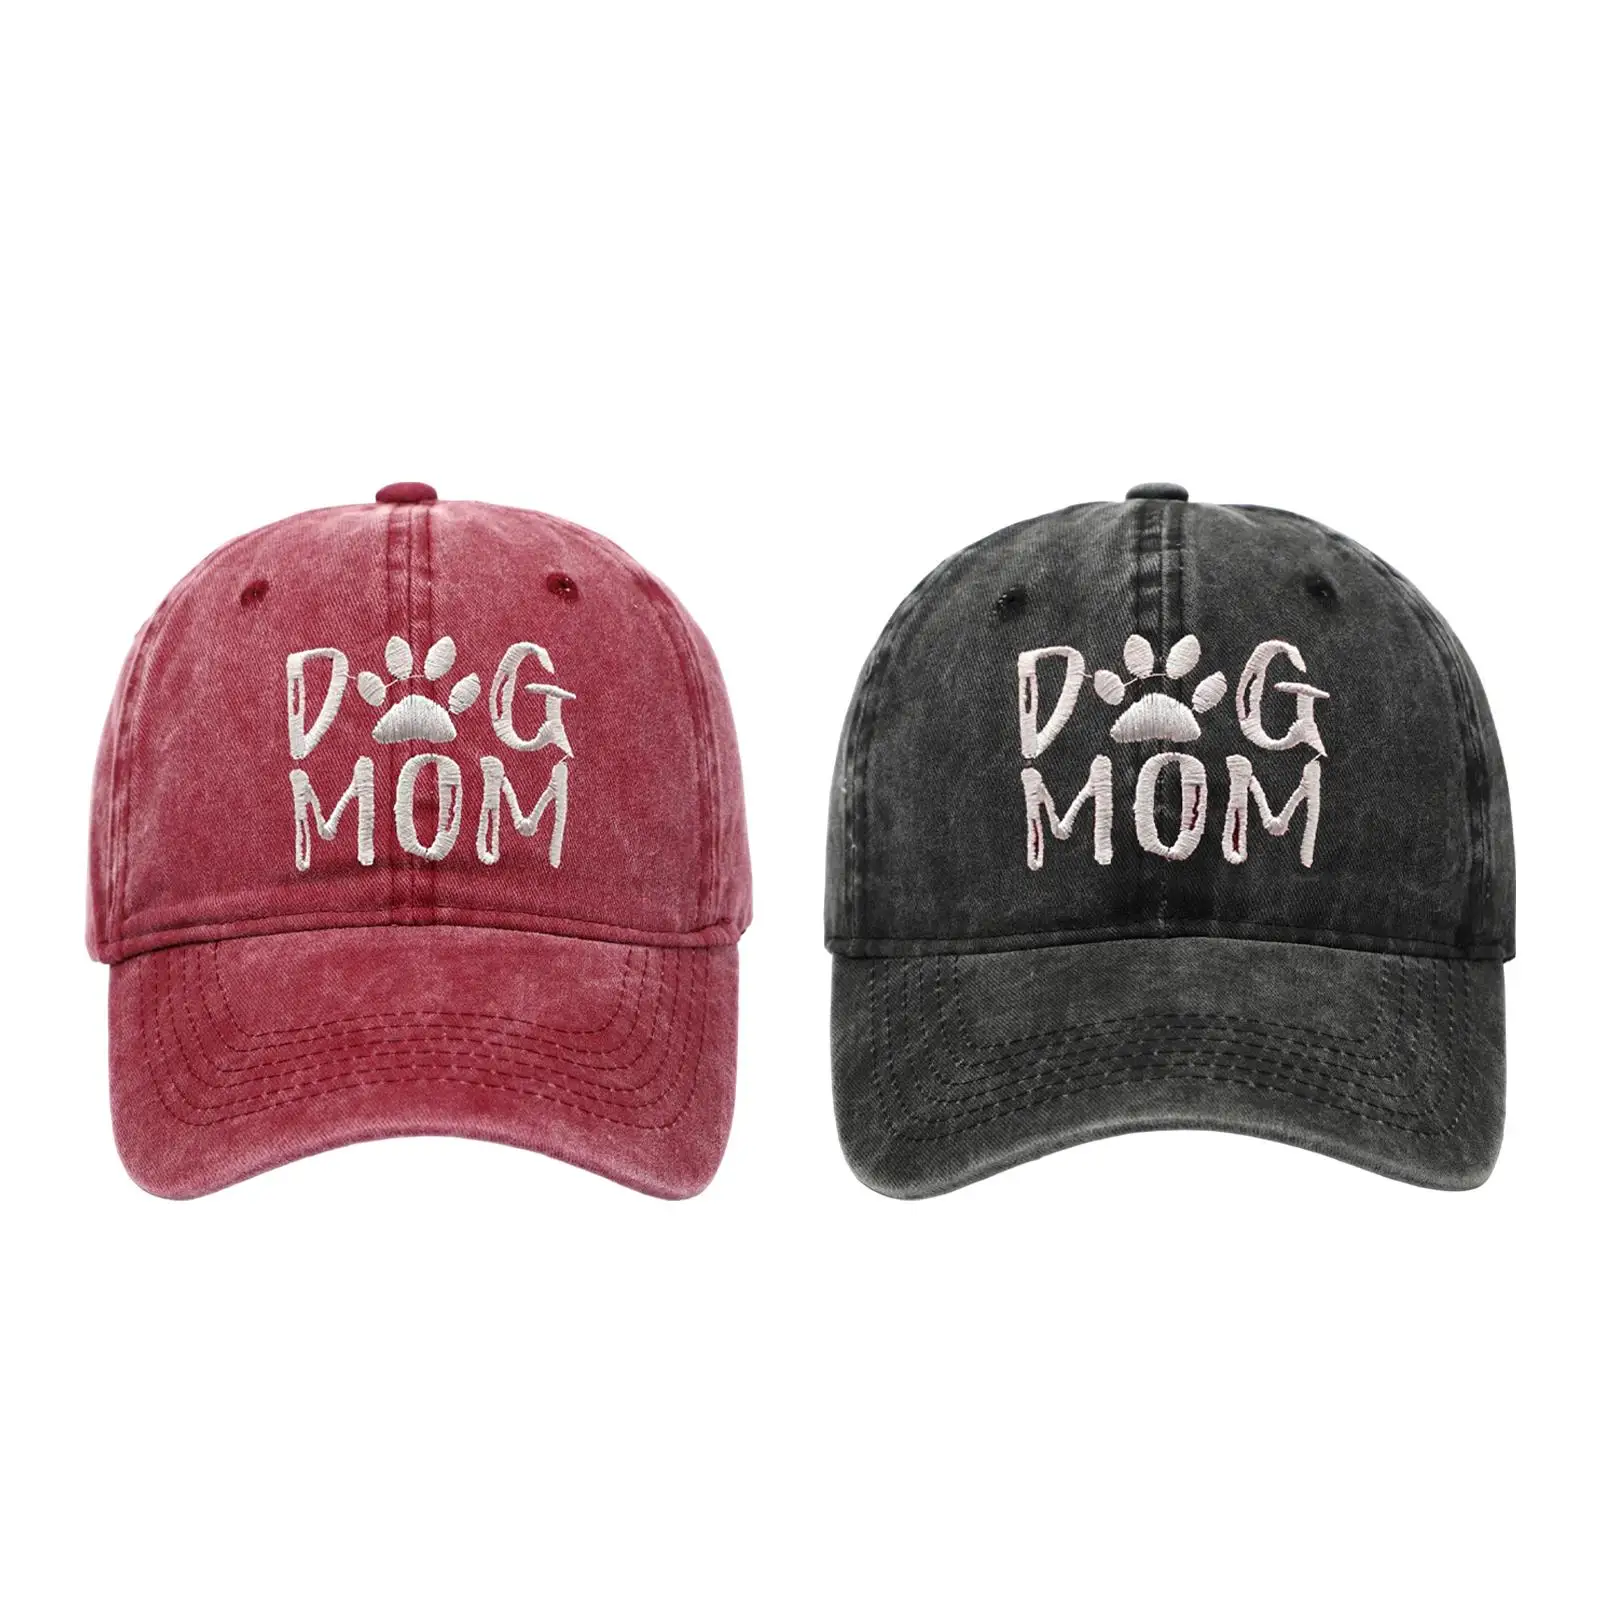 Mom Baseball Hat Mother's Day Gift Sun Hat for Parties Outdoor Gardening